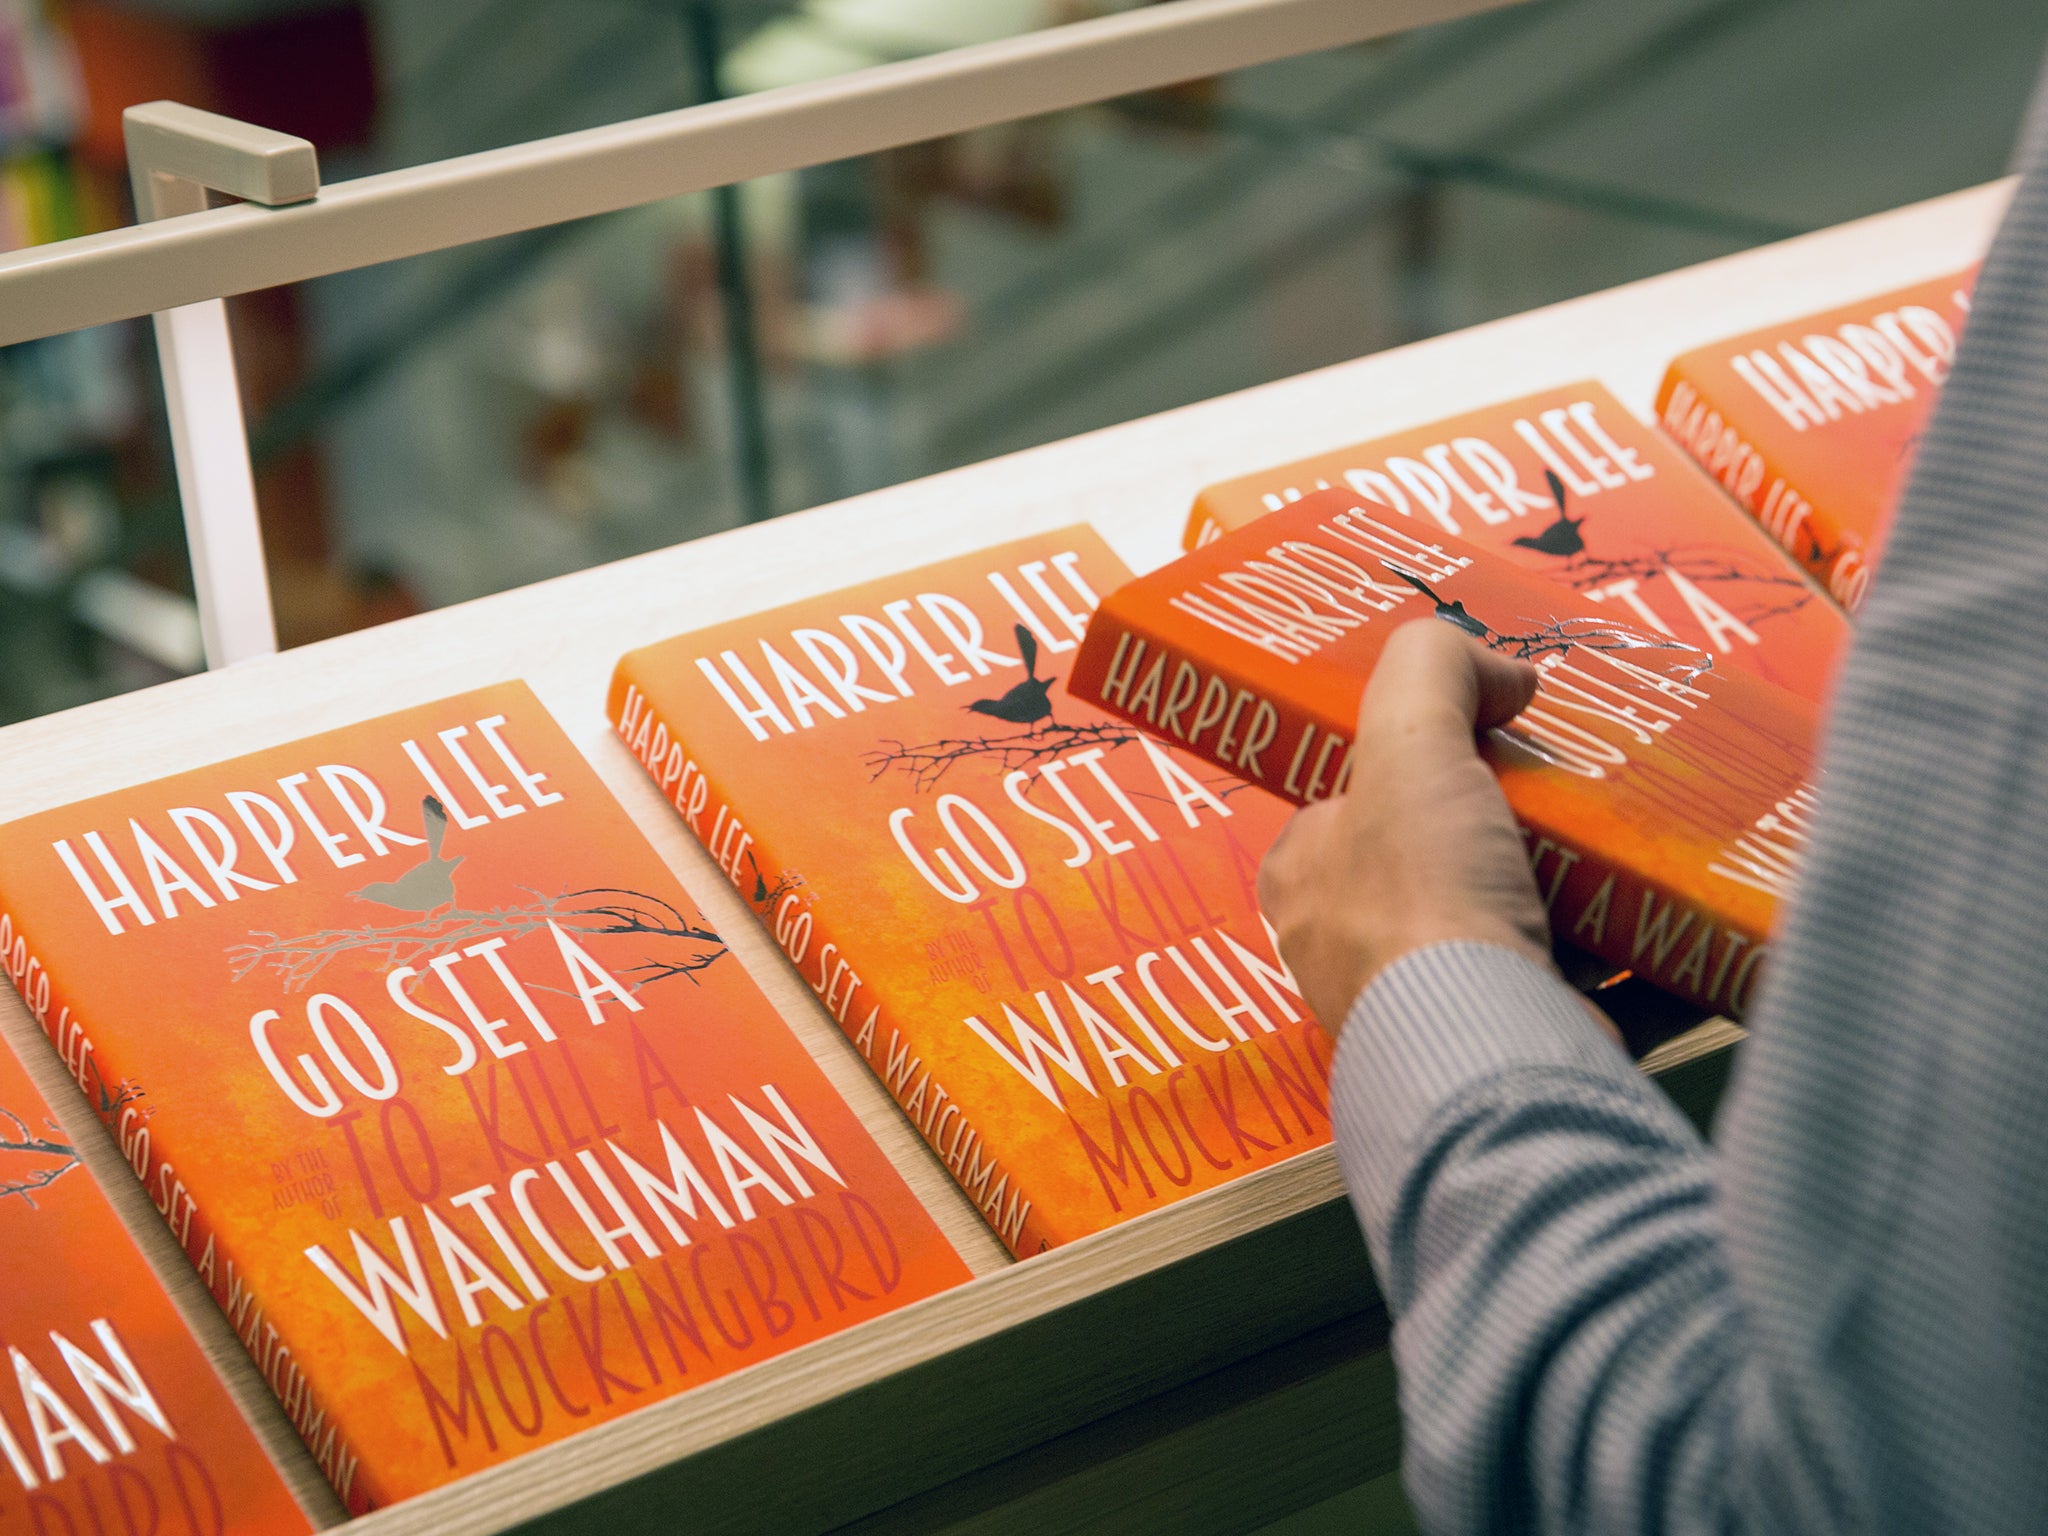 Go Set a Watchman has been flying off the shelves since its release on Monday